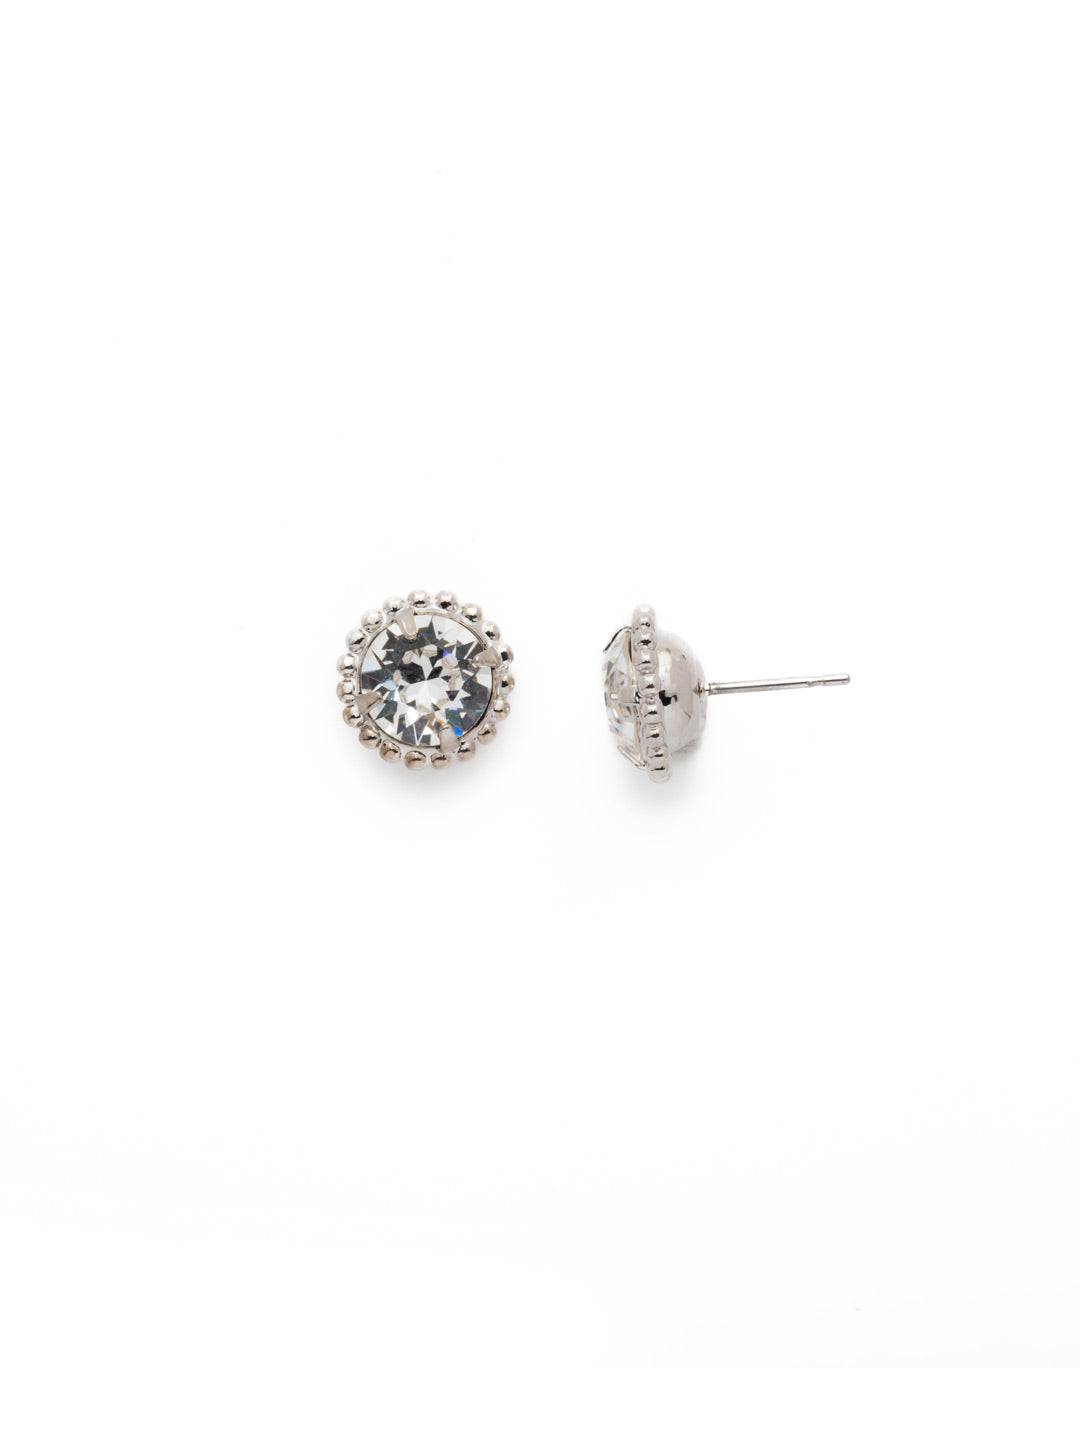 Simplicity Stud Earrings - EBY38RHCRY - <p>A timeless classic, the Simplicity Stud Earrings feature round cut crystals in a variety of colors; accented with a halo of metal beaded detail. Need help picking a stud? <a href="https://www.sorrelli.com/blogs/sisterhood/round-stud-earrings-101-a-rundown-of-sizes-styles-and-sparkle">Check out our size guide!</a> From Sorrelli's Crystal collection in our Palladium Silver-tone finish.</p>